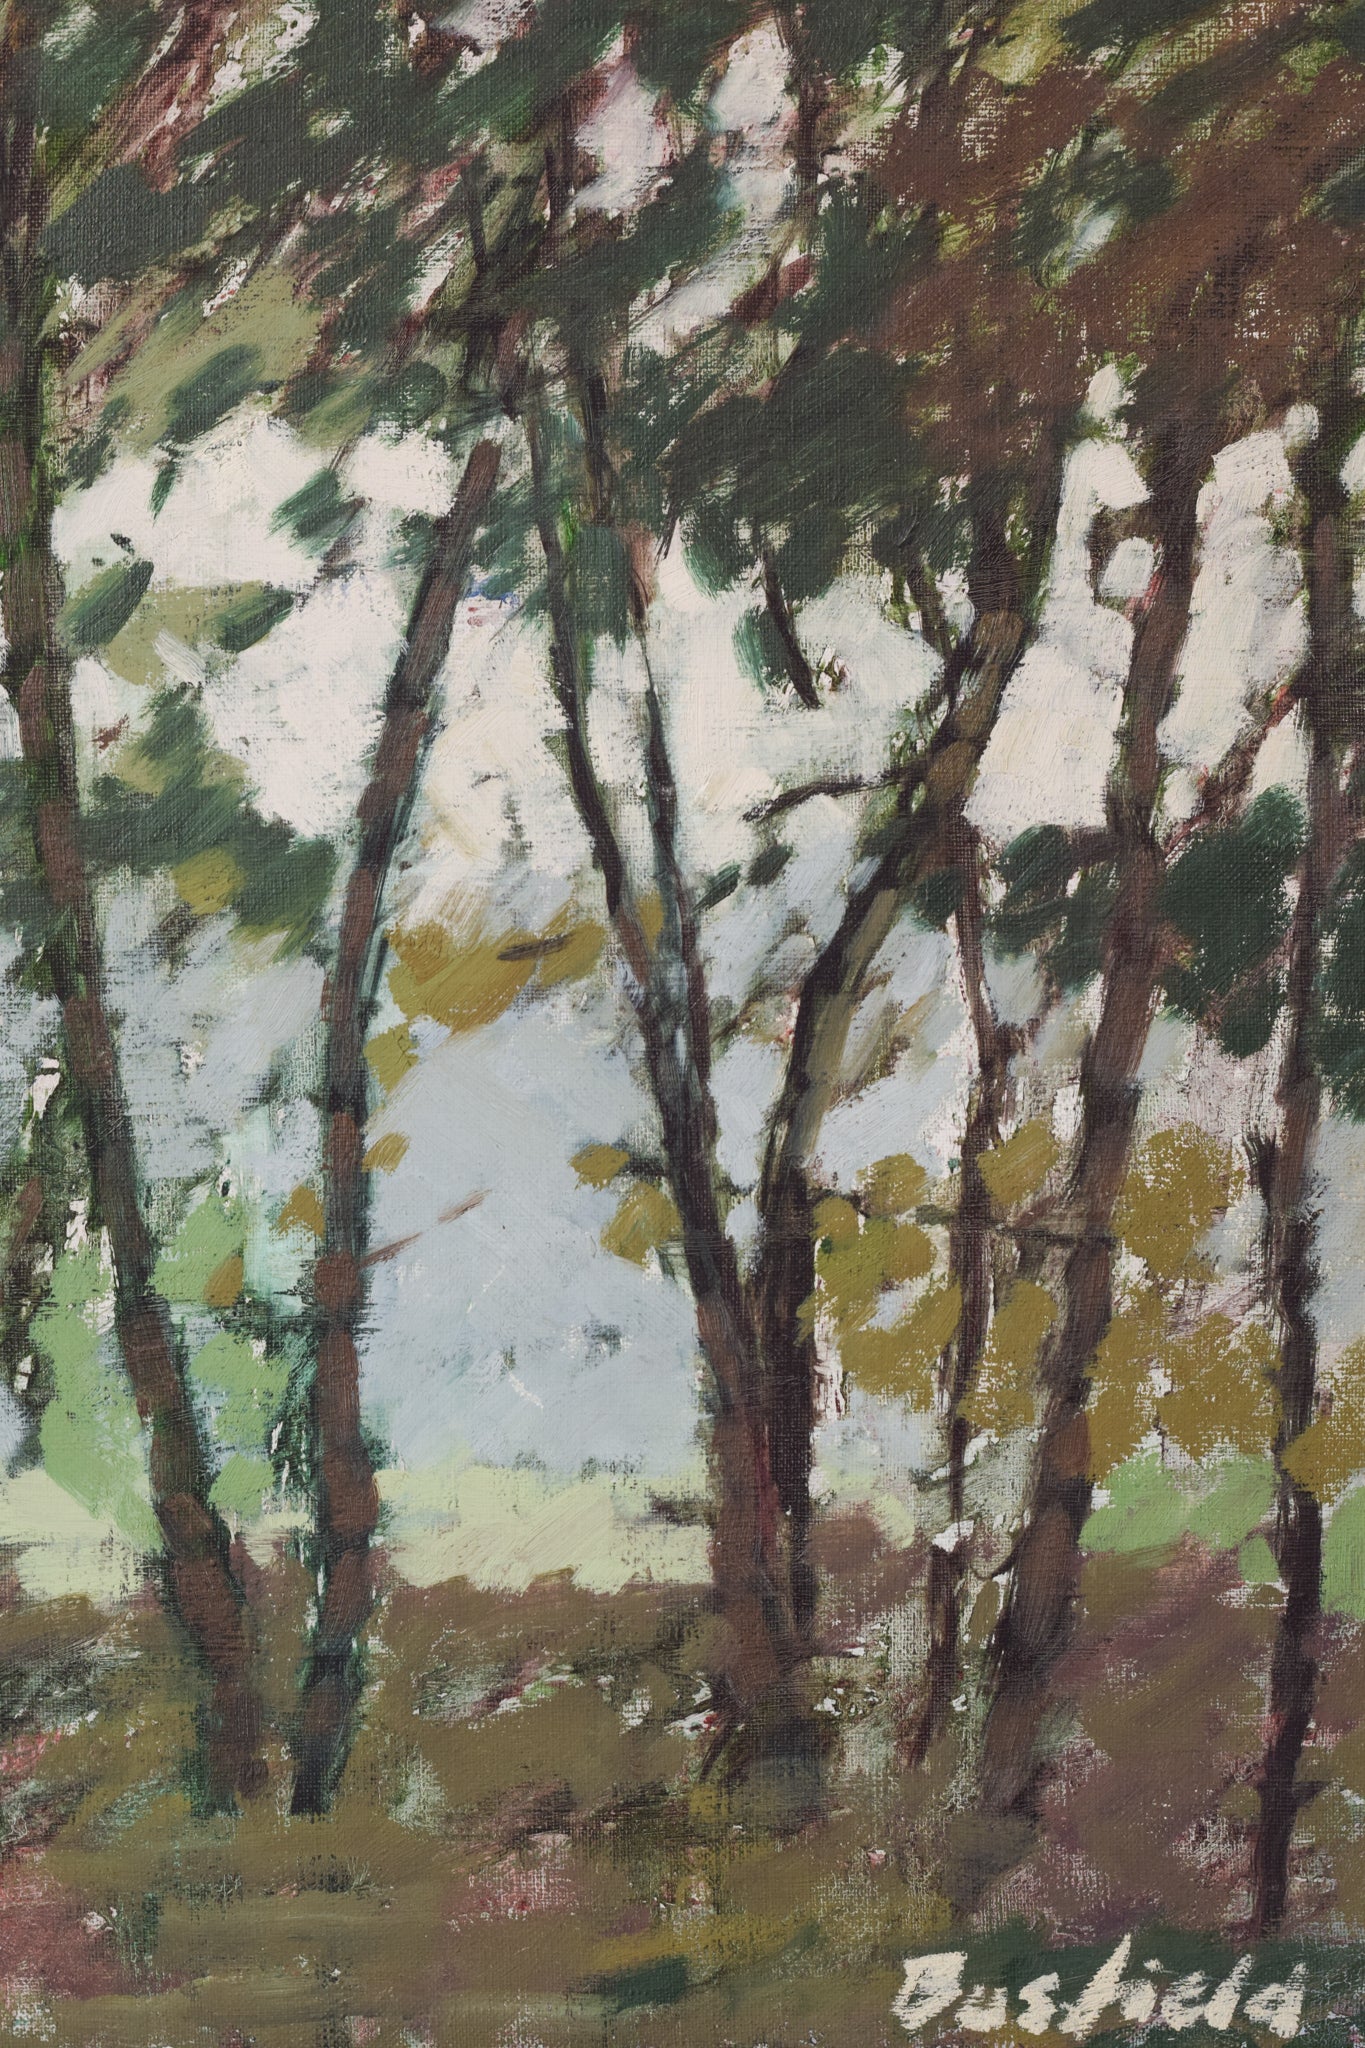 Impressionist Plein Air Trees and Light. Oil by Brian Busfield